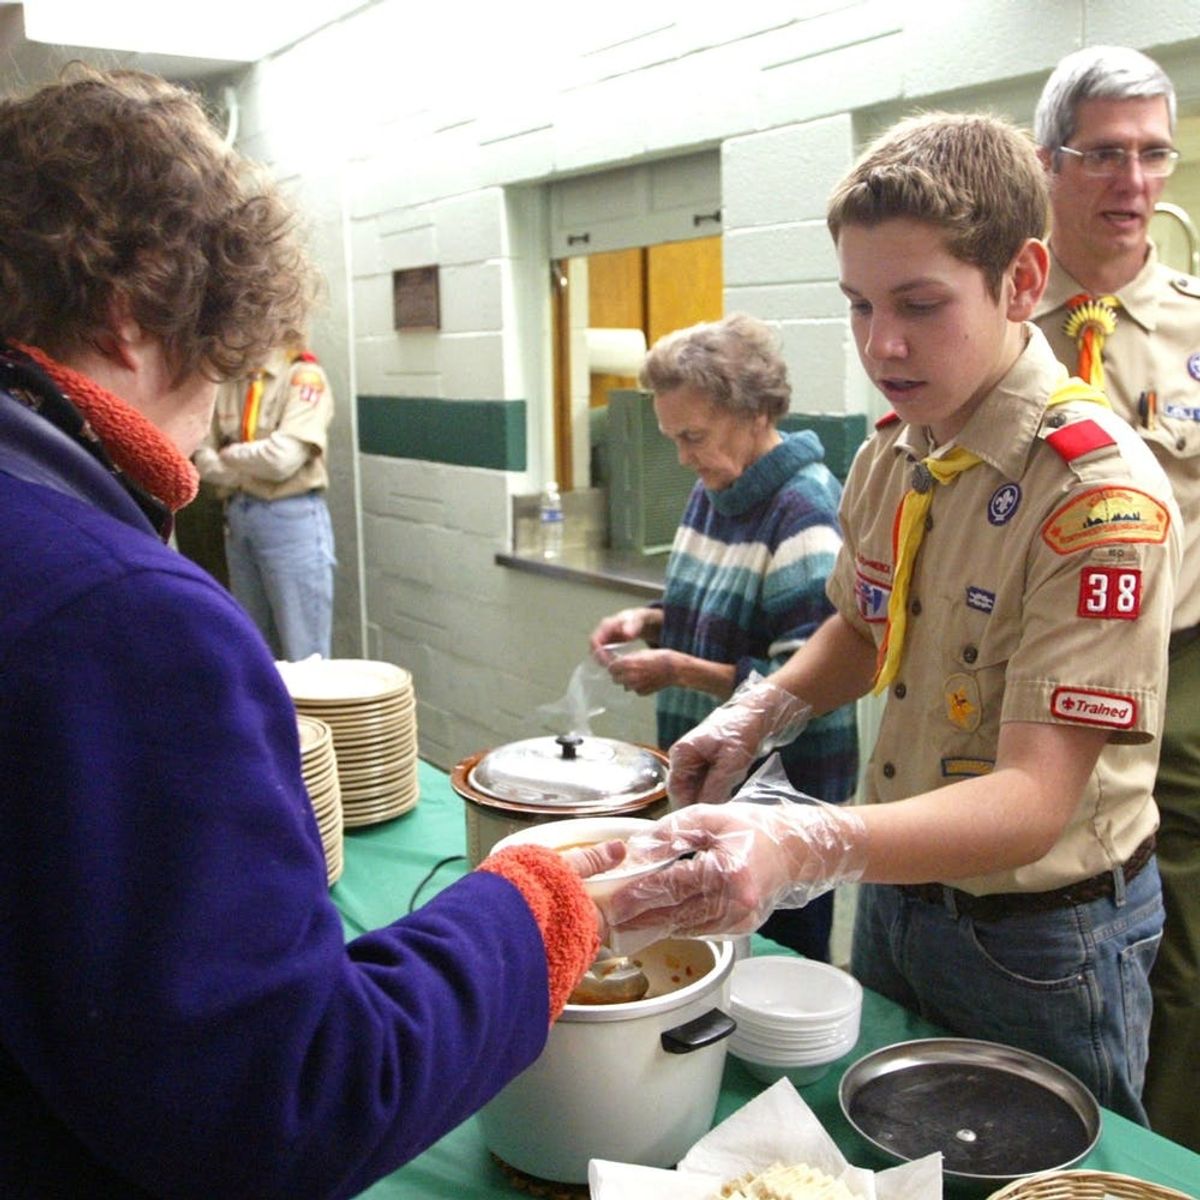 Why the Boy Scouts of America Are Officially Dropping ‘Boy’ from Their Name